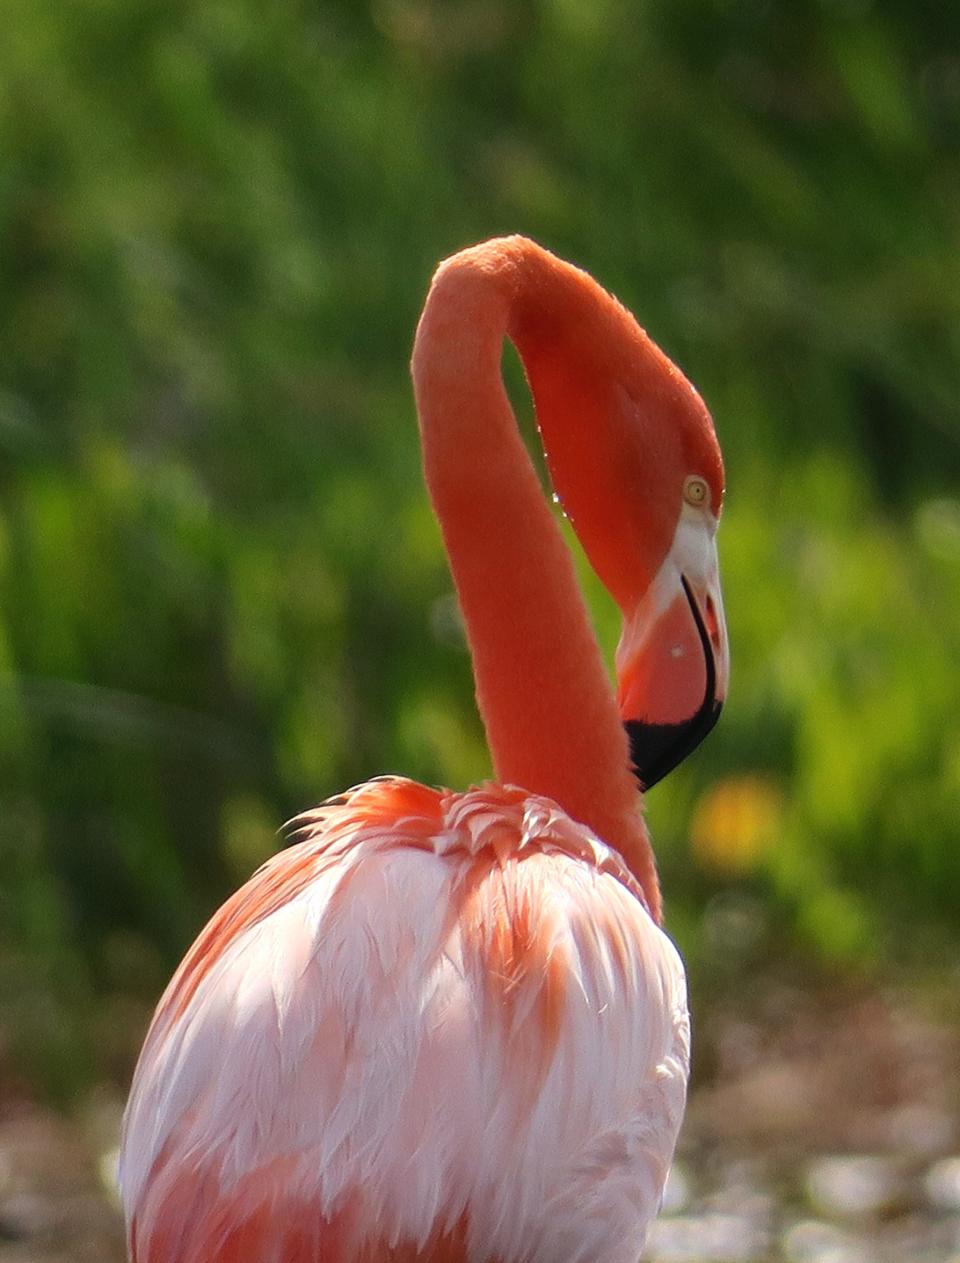 Good binoculars, a spotting scope, or a camera with a strong zoom lens are often required to view Pinky, an American flamingo, who arrived at St. Marks National Wildlife Refuge in 2018.